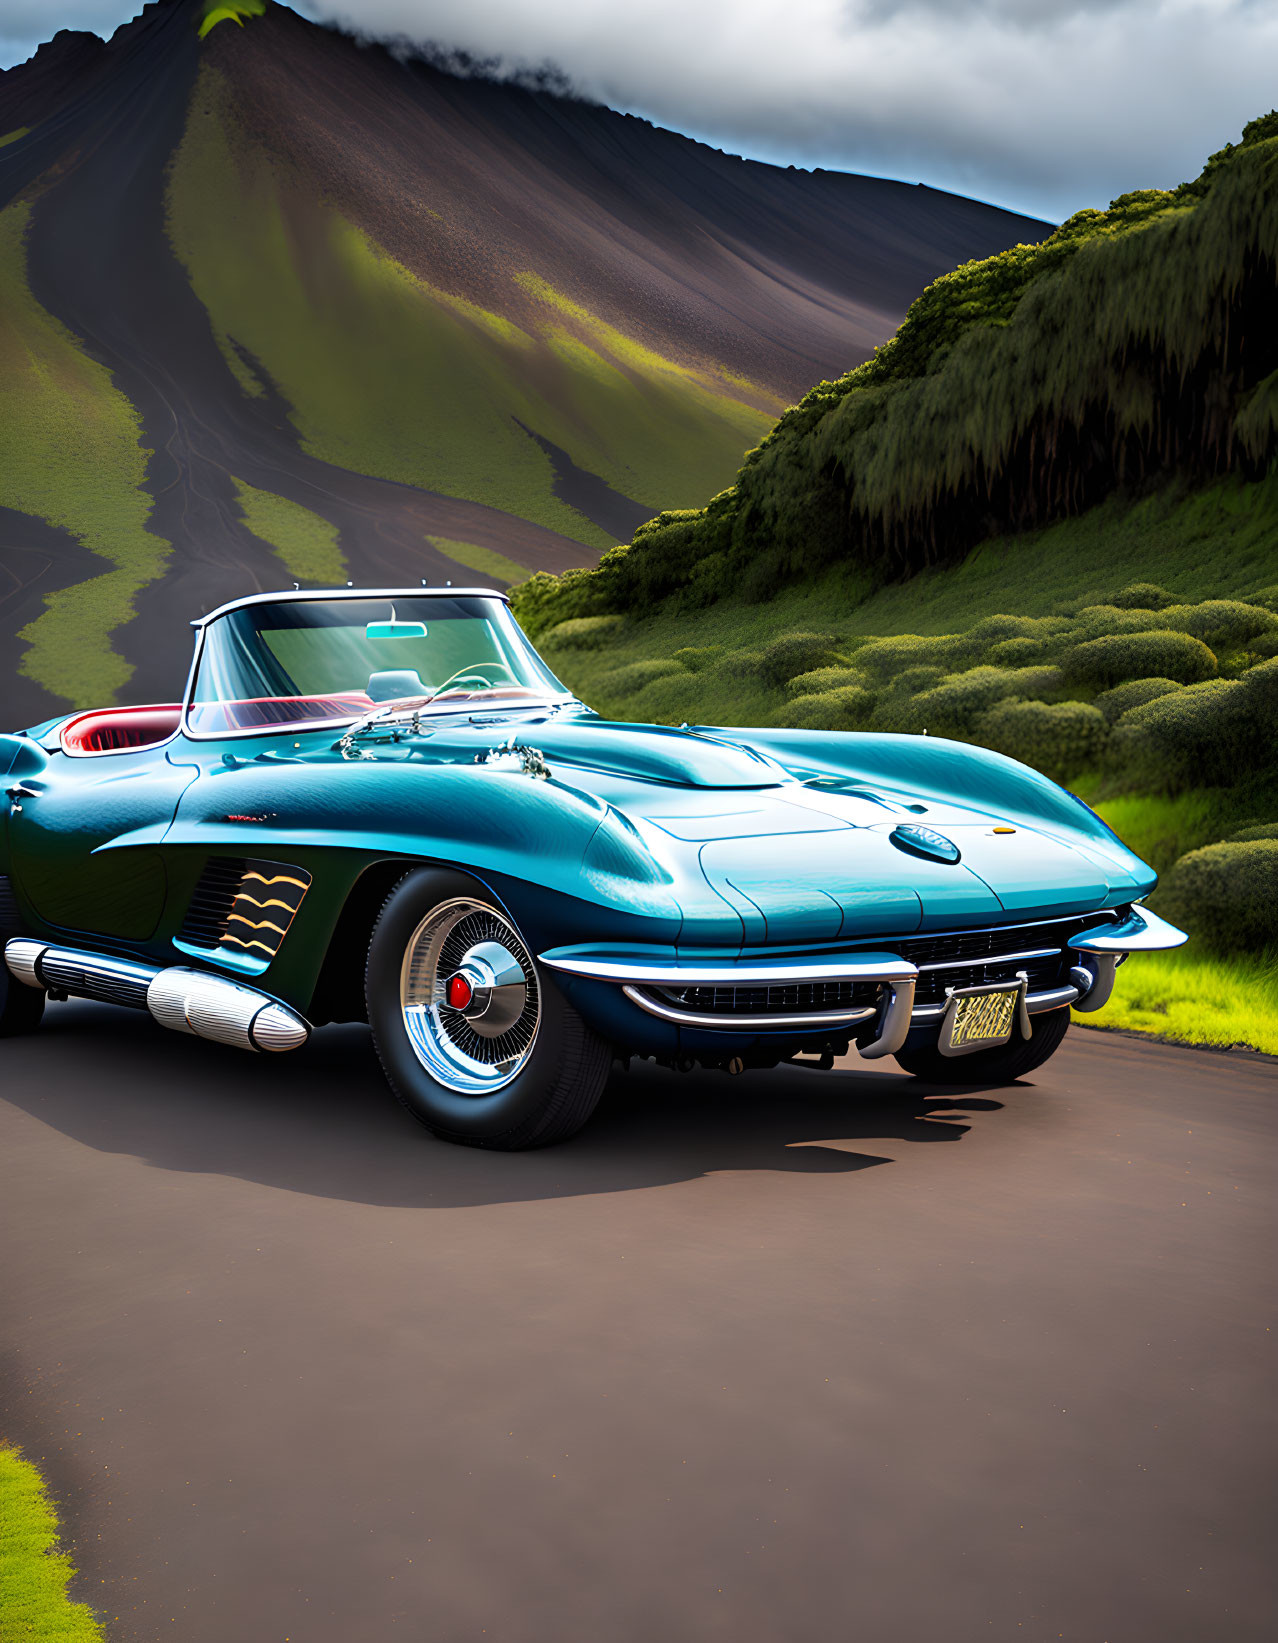 Vintage turquoise Corvette on winding road with lush hills and volcano backdrop.